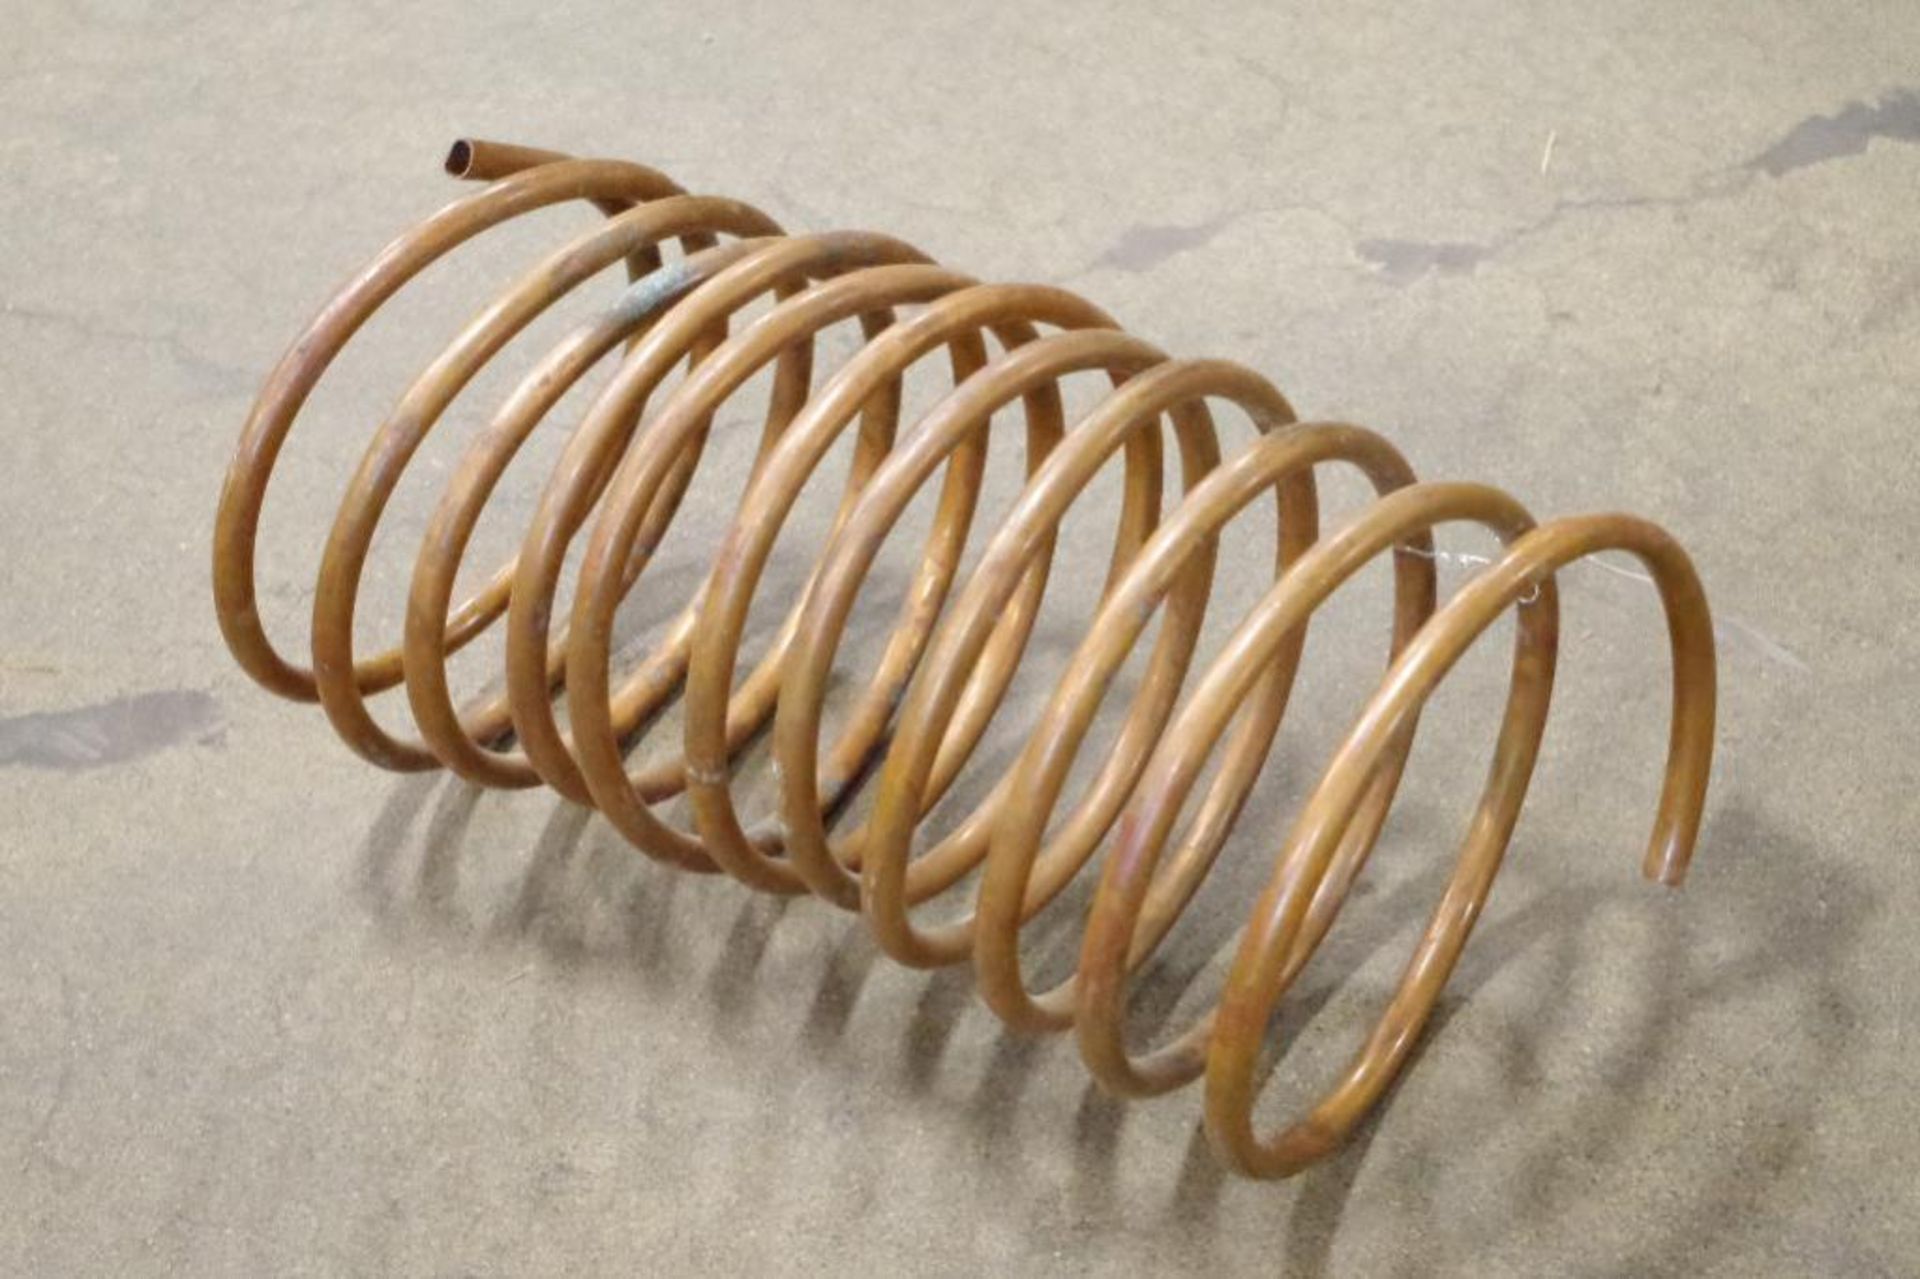 Coil of Approx. 5/8"D Copper Tubing (Coil Diameter Approx 11") - Image 3 of 3